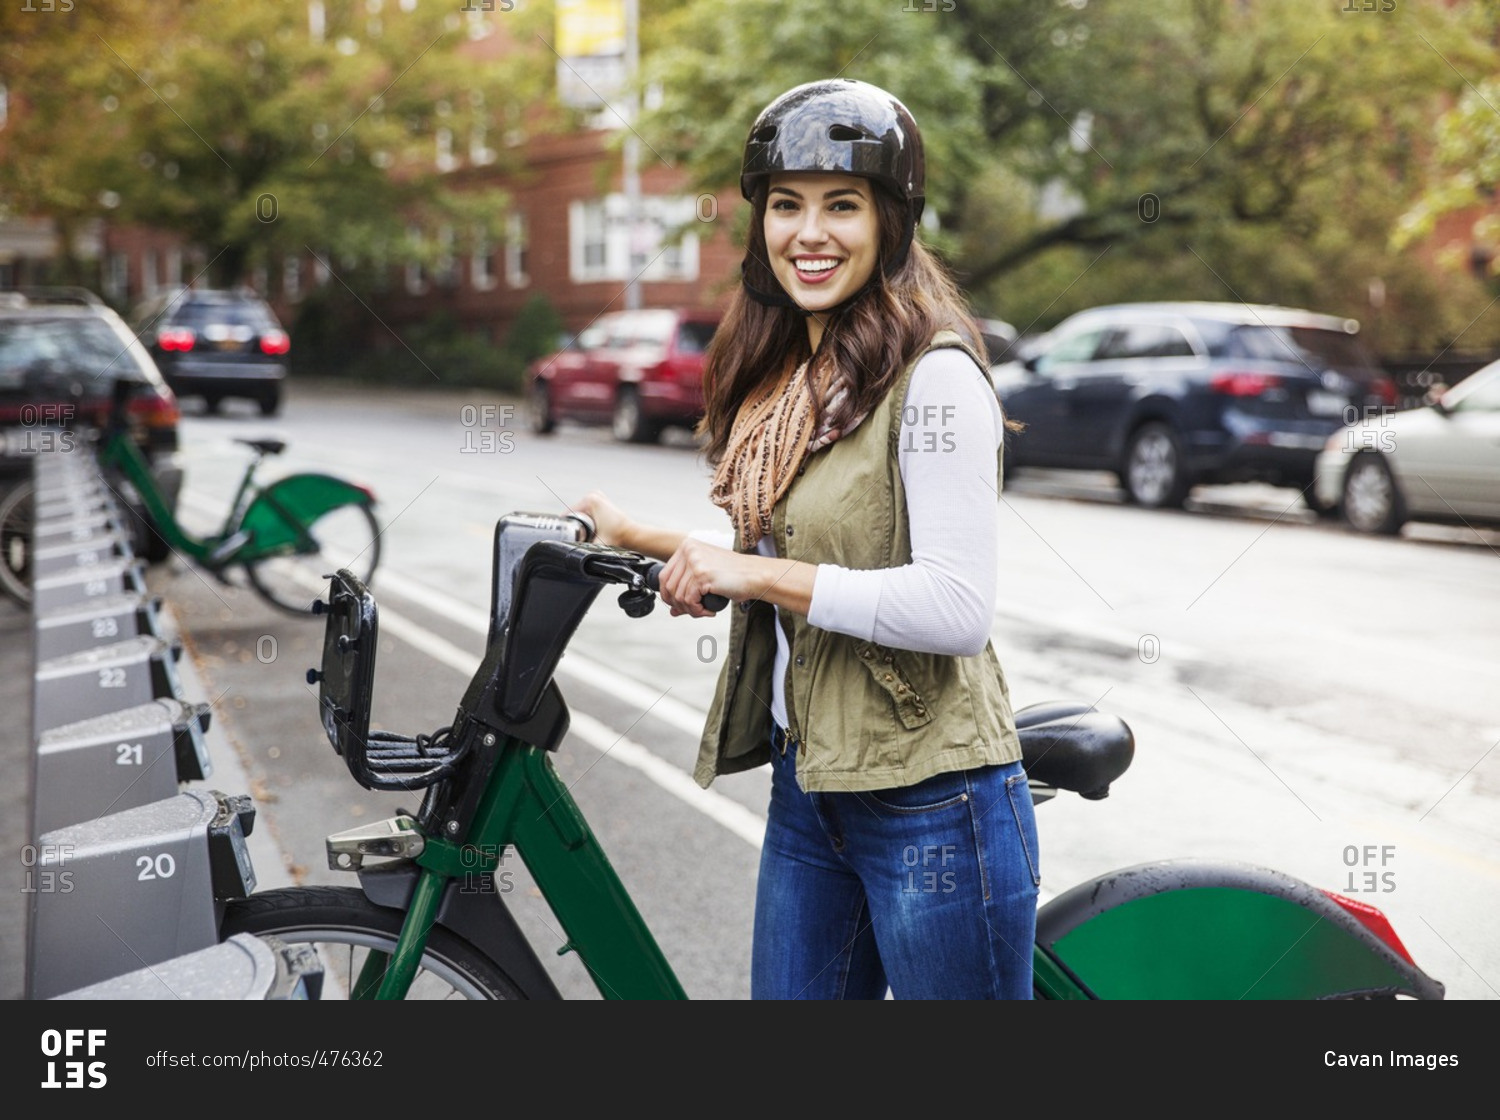 Portrait of smiling woman with bicycle standing at parking lot